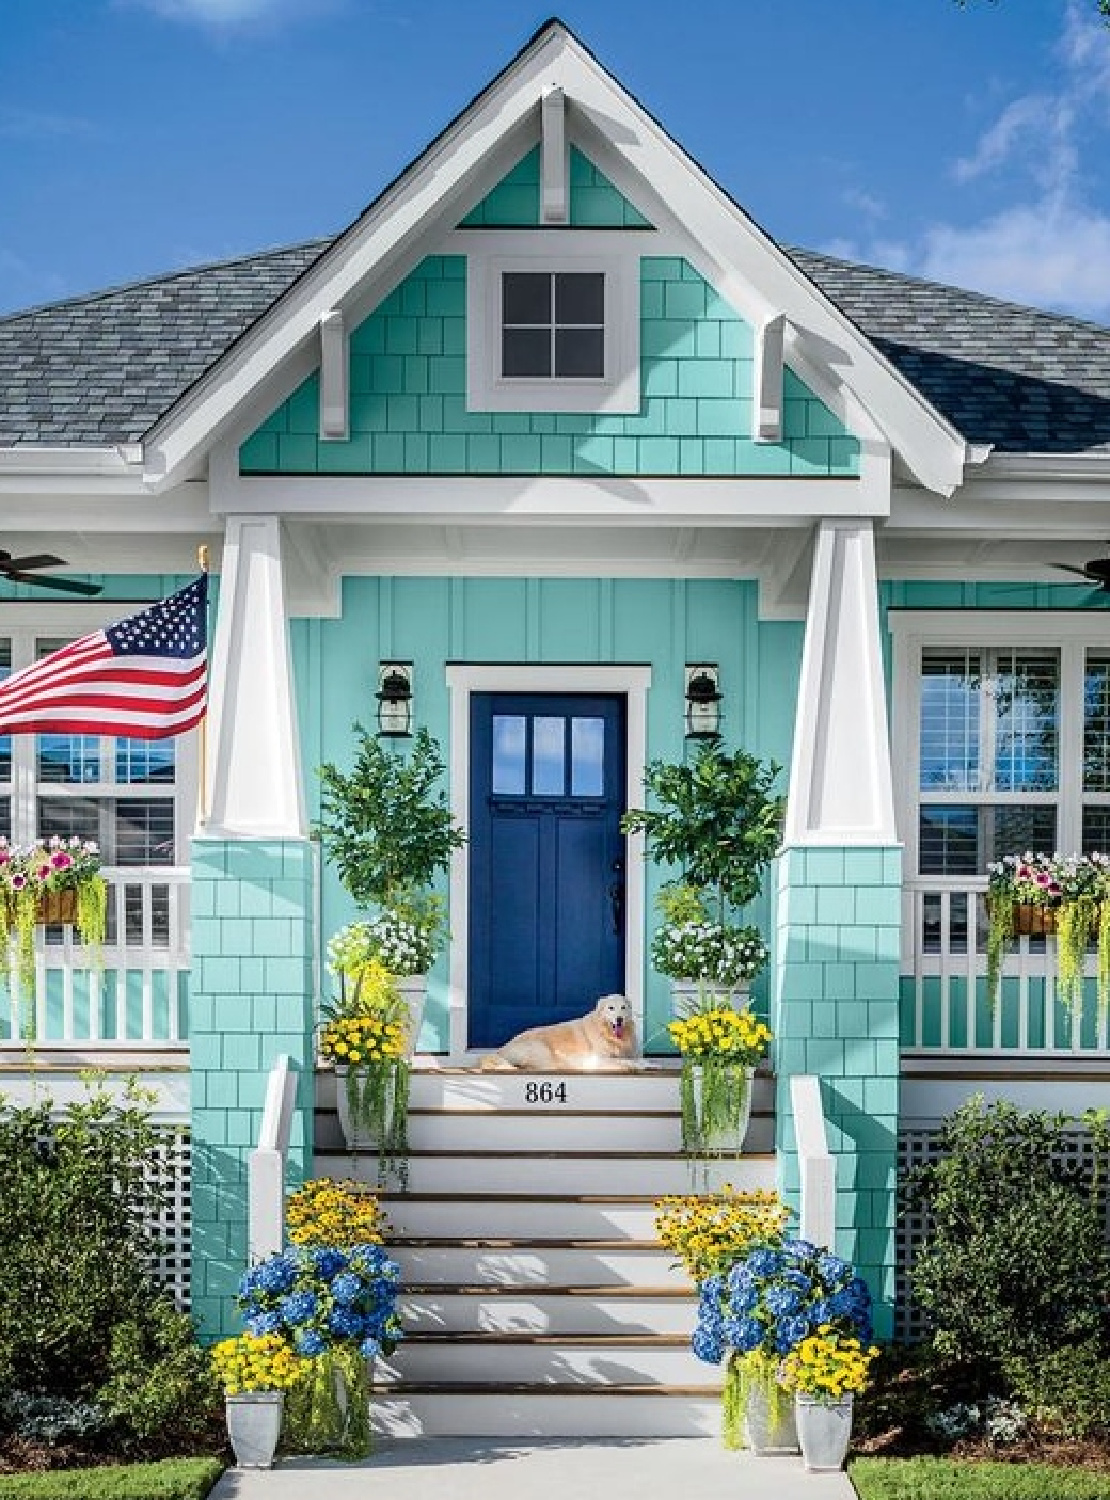 Bright turquoise cottage exterior with royal blue front door - Completely Coastal. #coastalcottage #turquoise